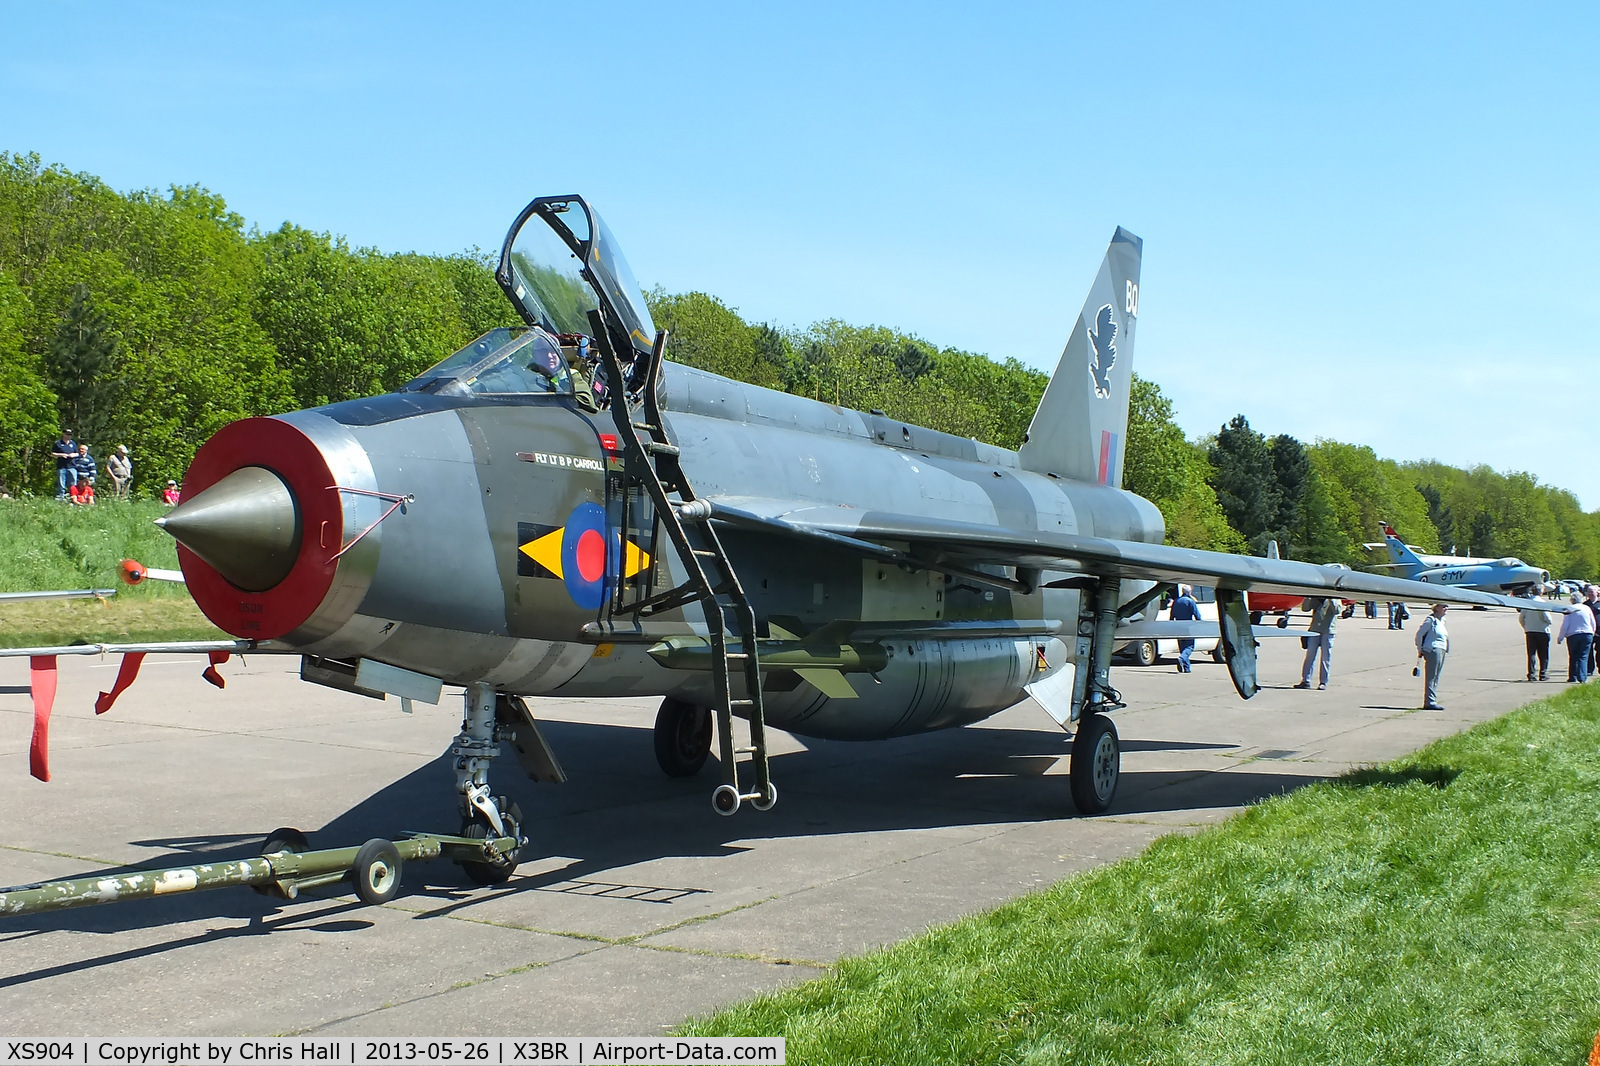 XS904, 1966 English Electric Lightning F.6 C/N 95250, at the Cold War Jets open day, Bruntingthorpe